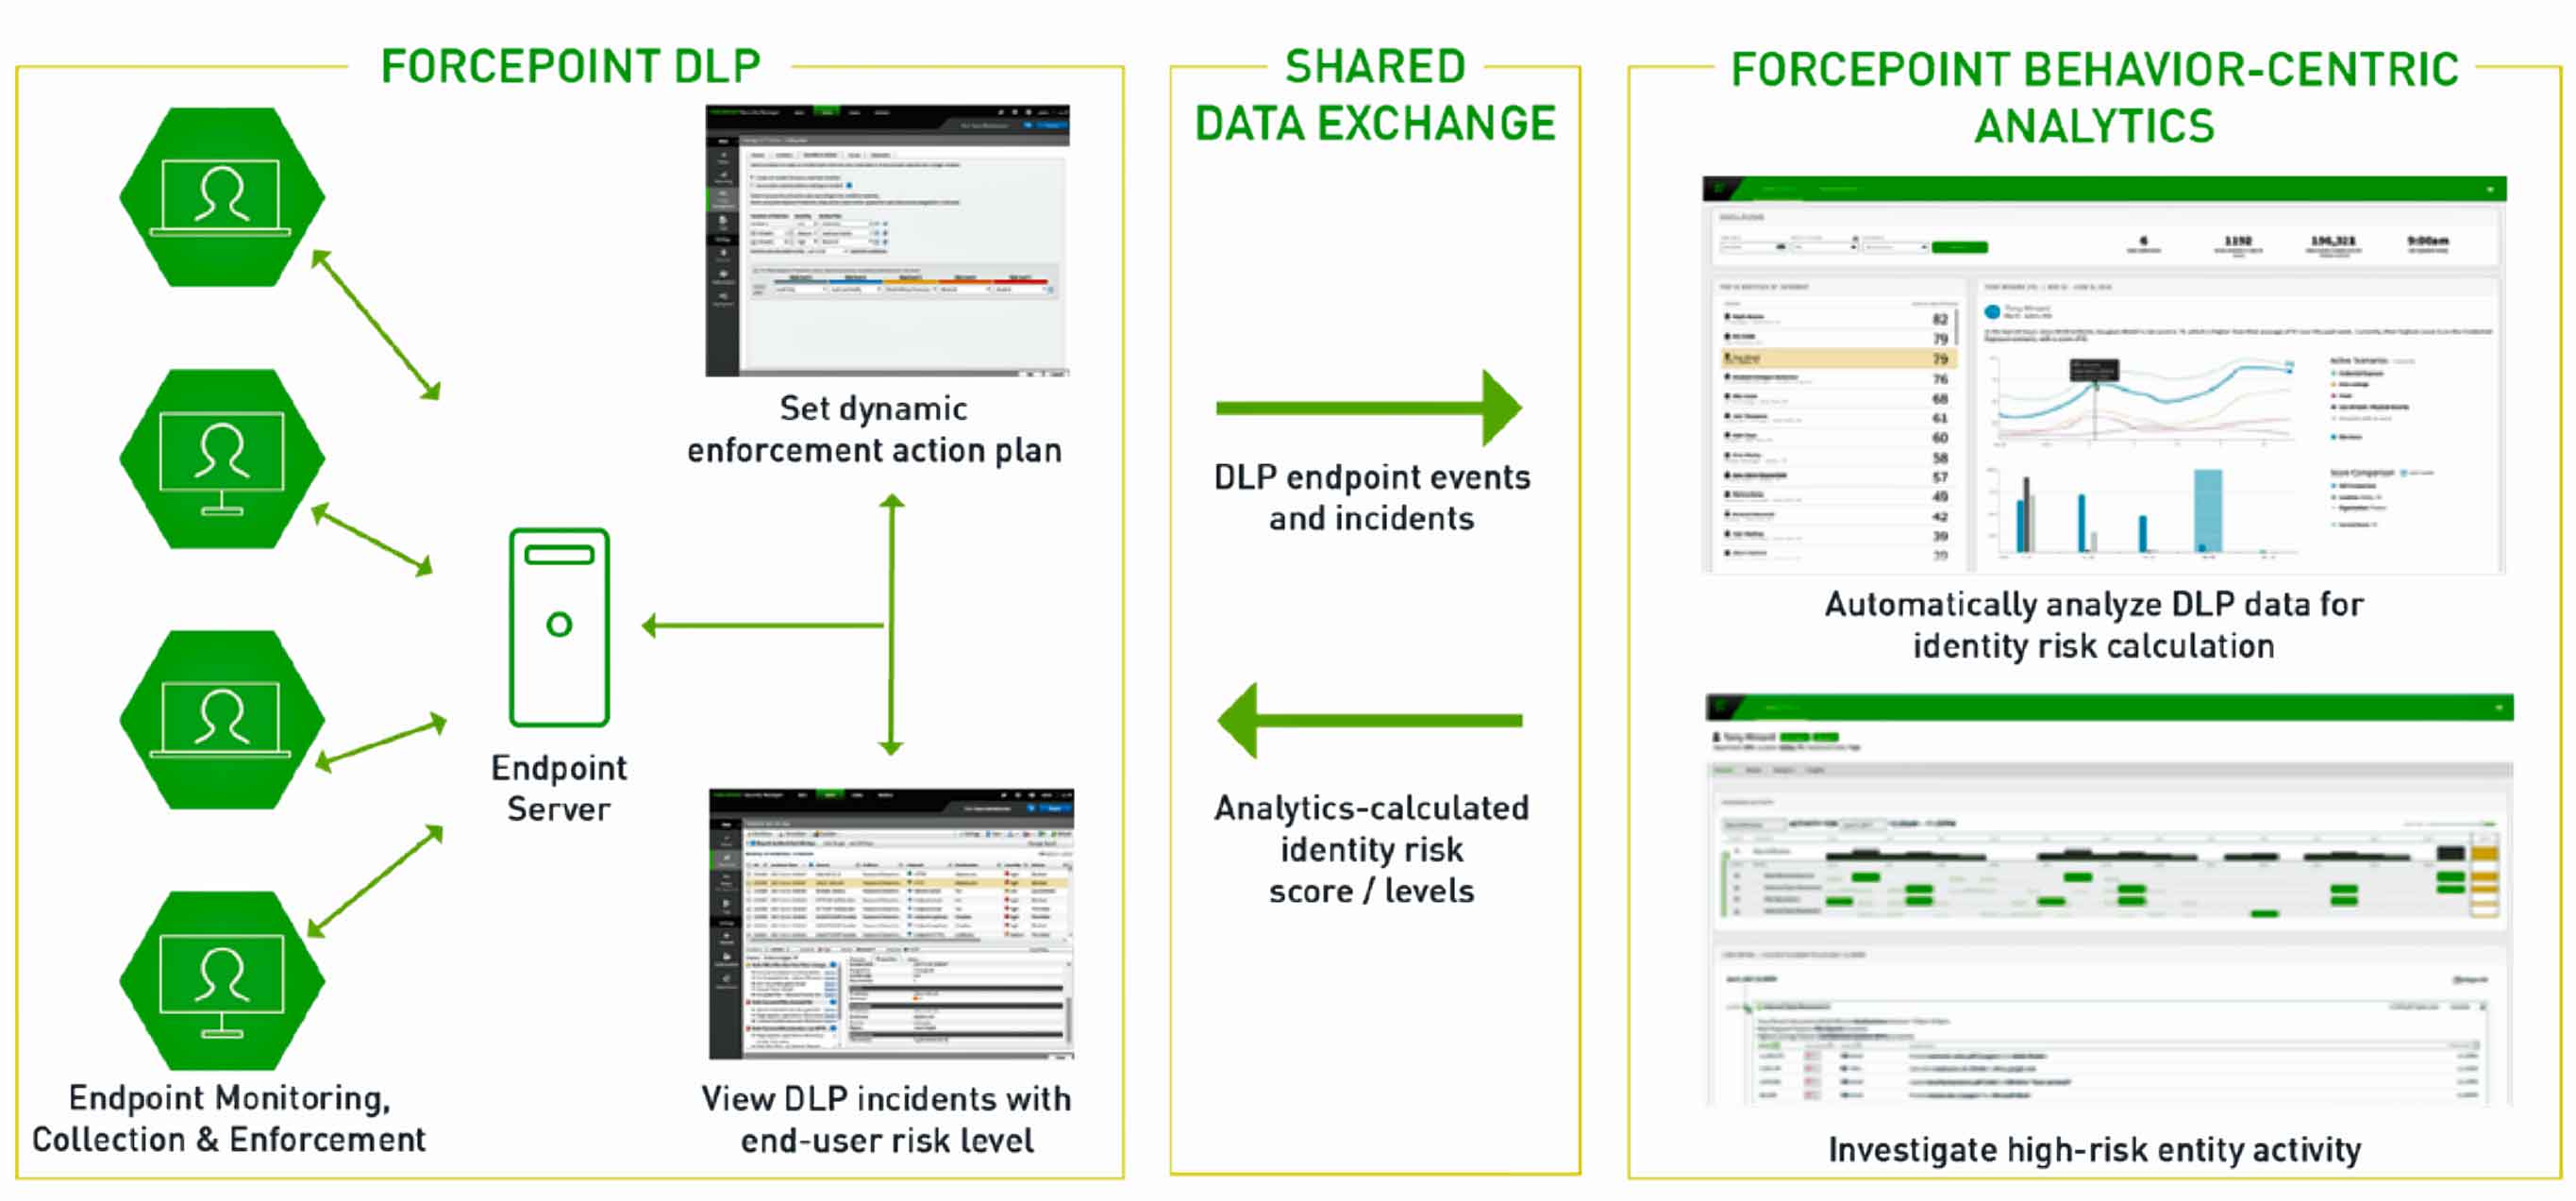 Courtesy of Forcepoint